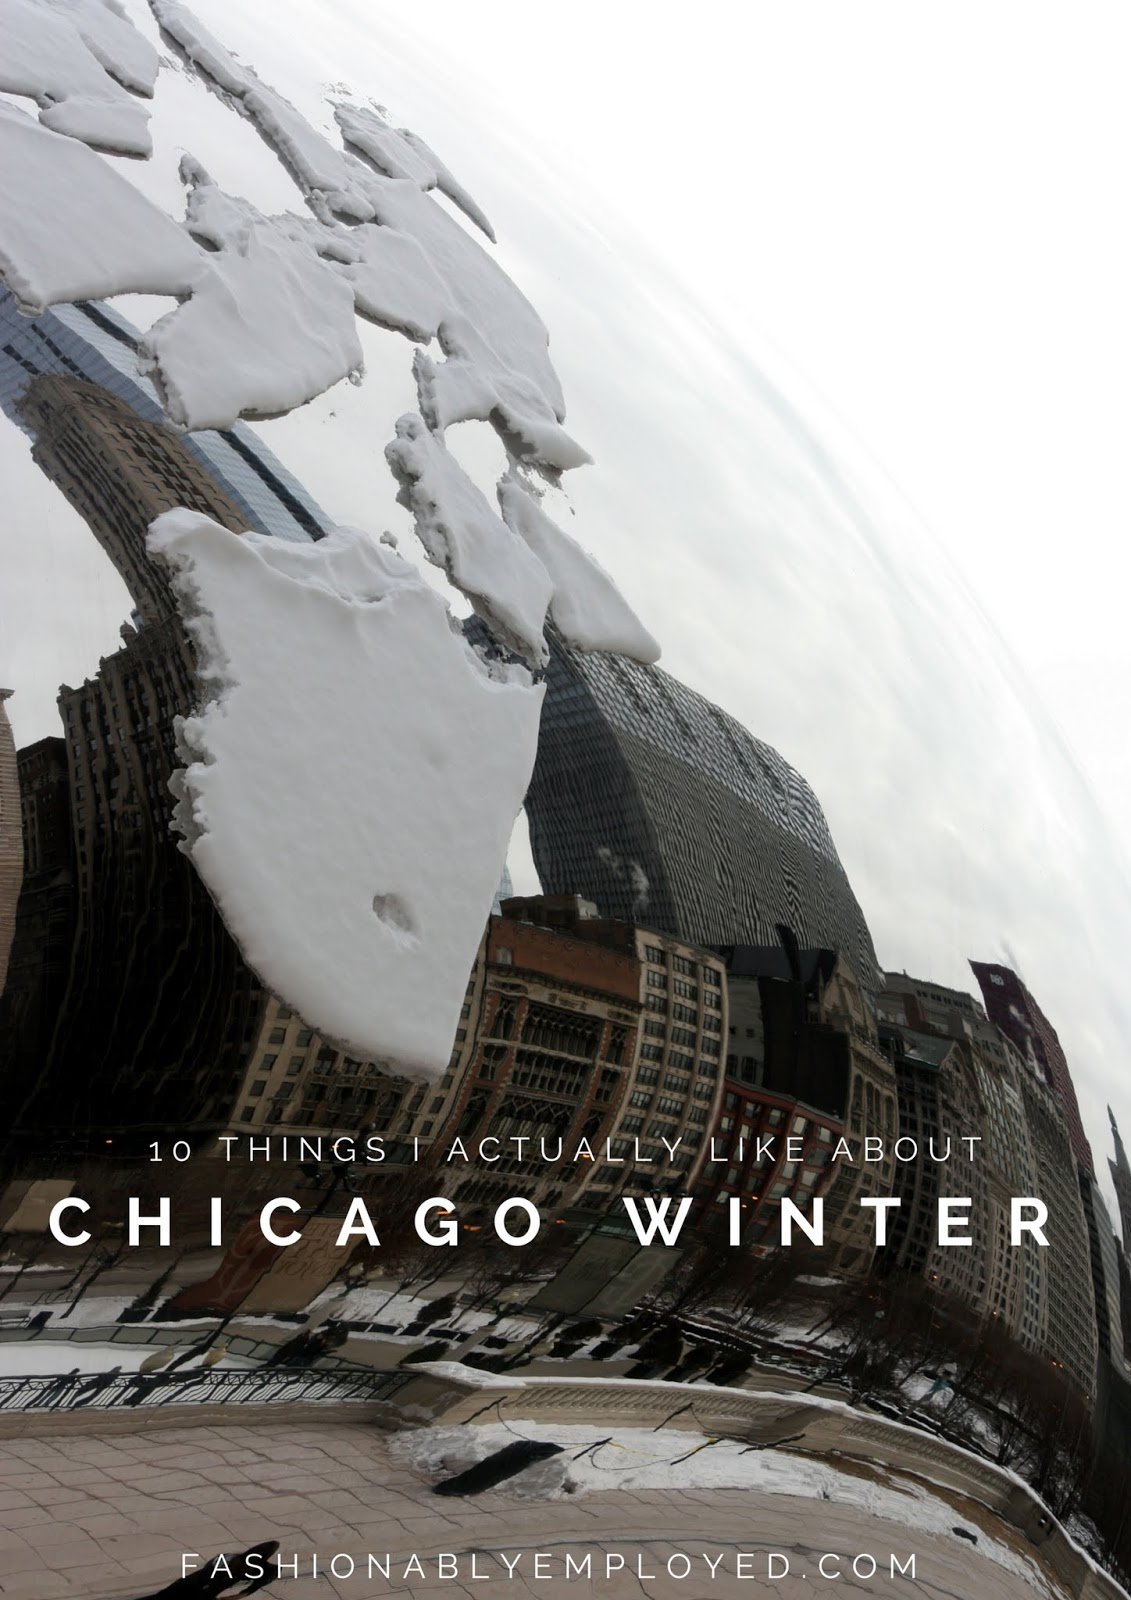 FashionablyEmployed.com | 10 Things I Actually Like about Chicago Winter